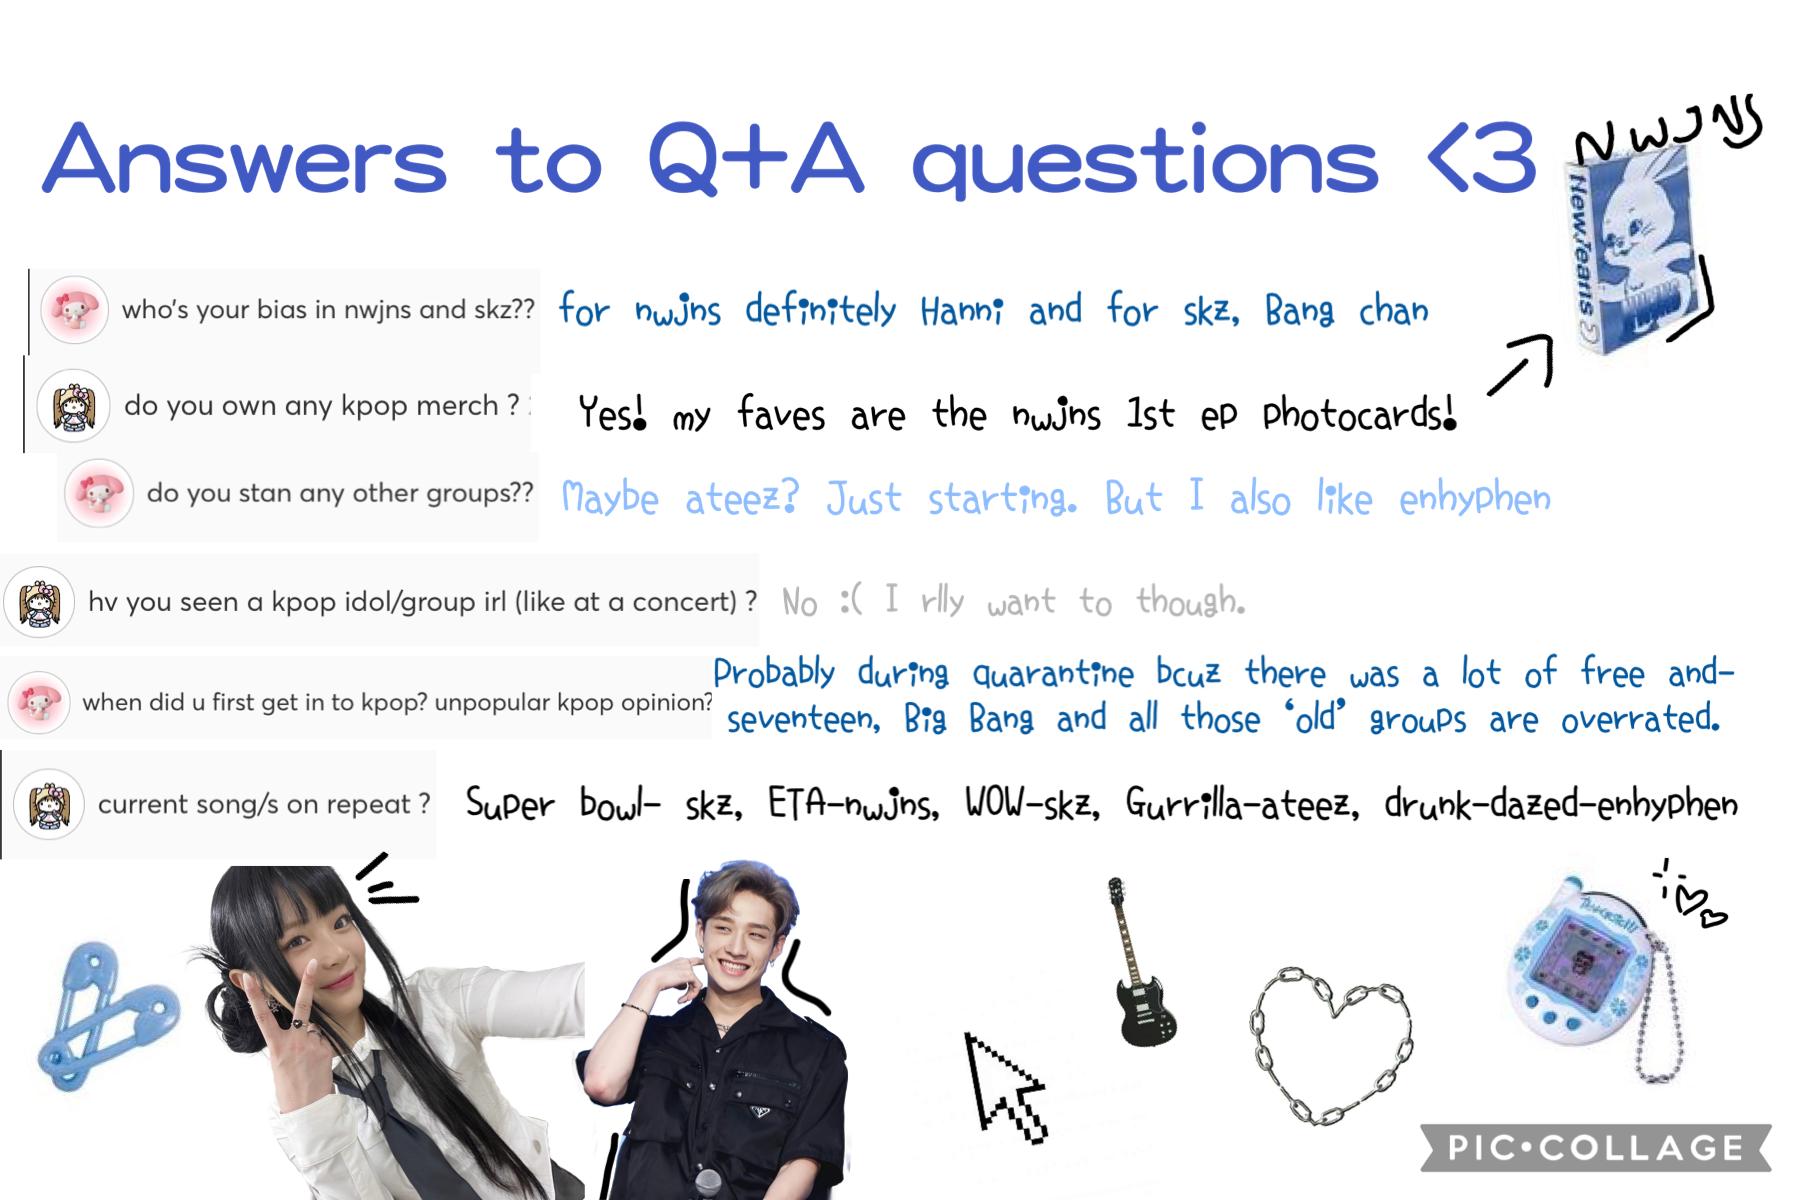 Answers to q+a questions!